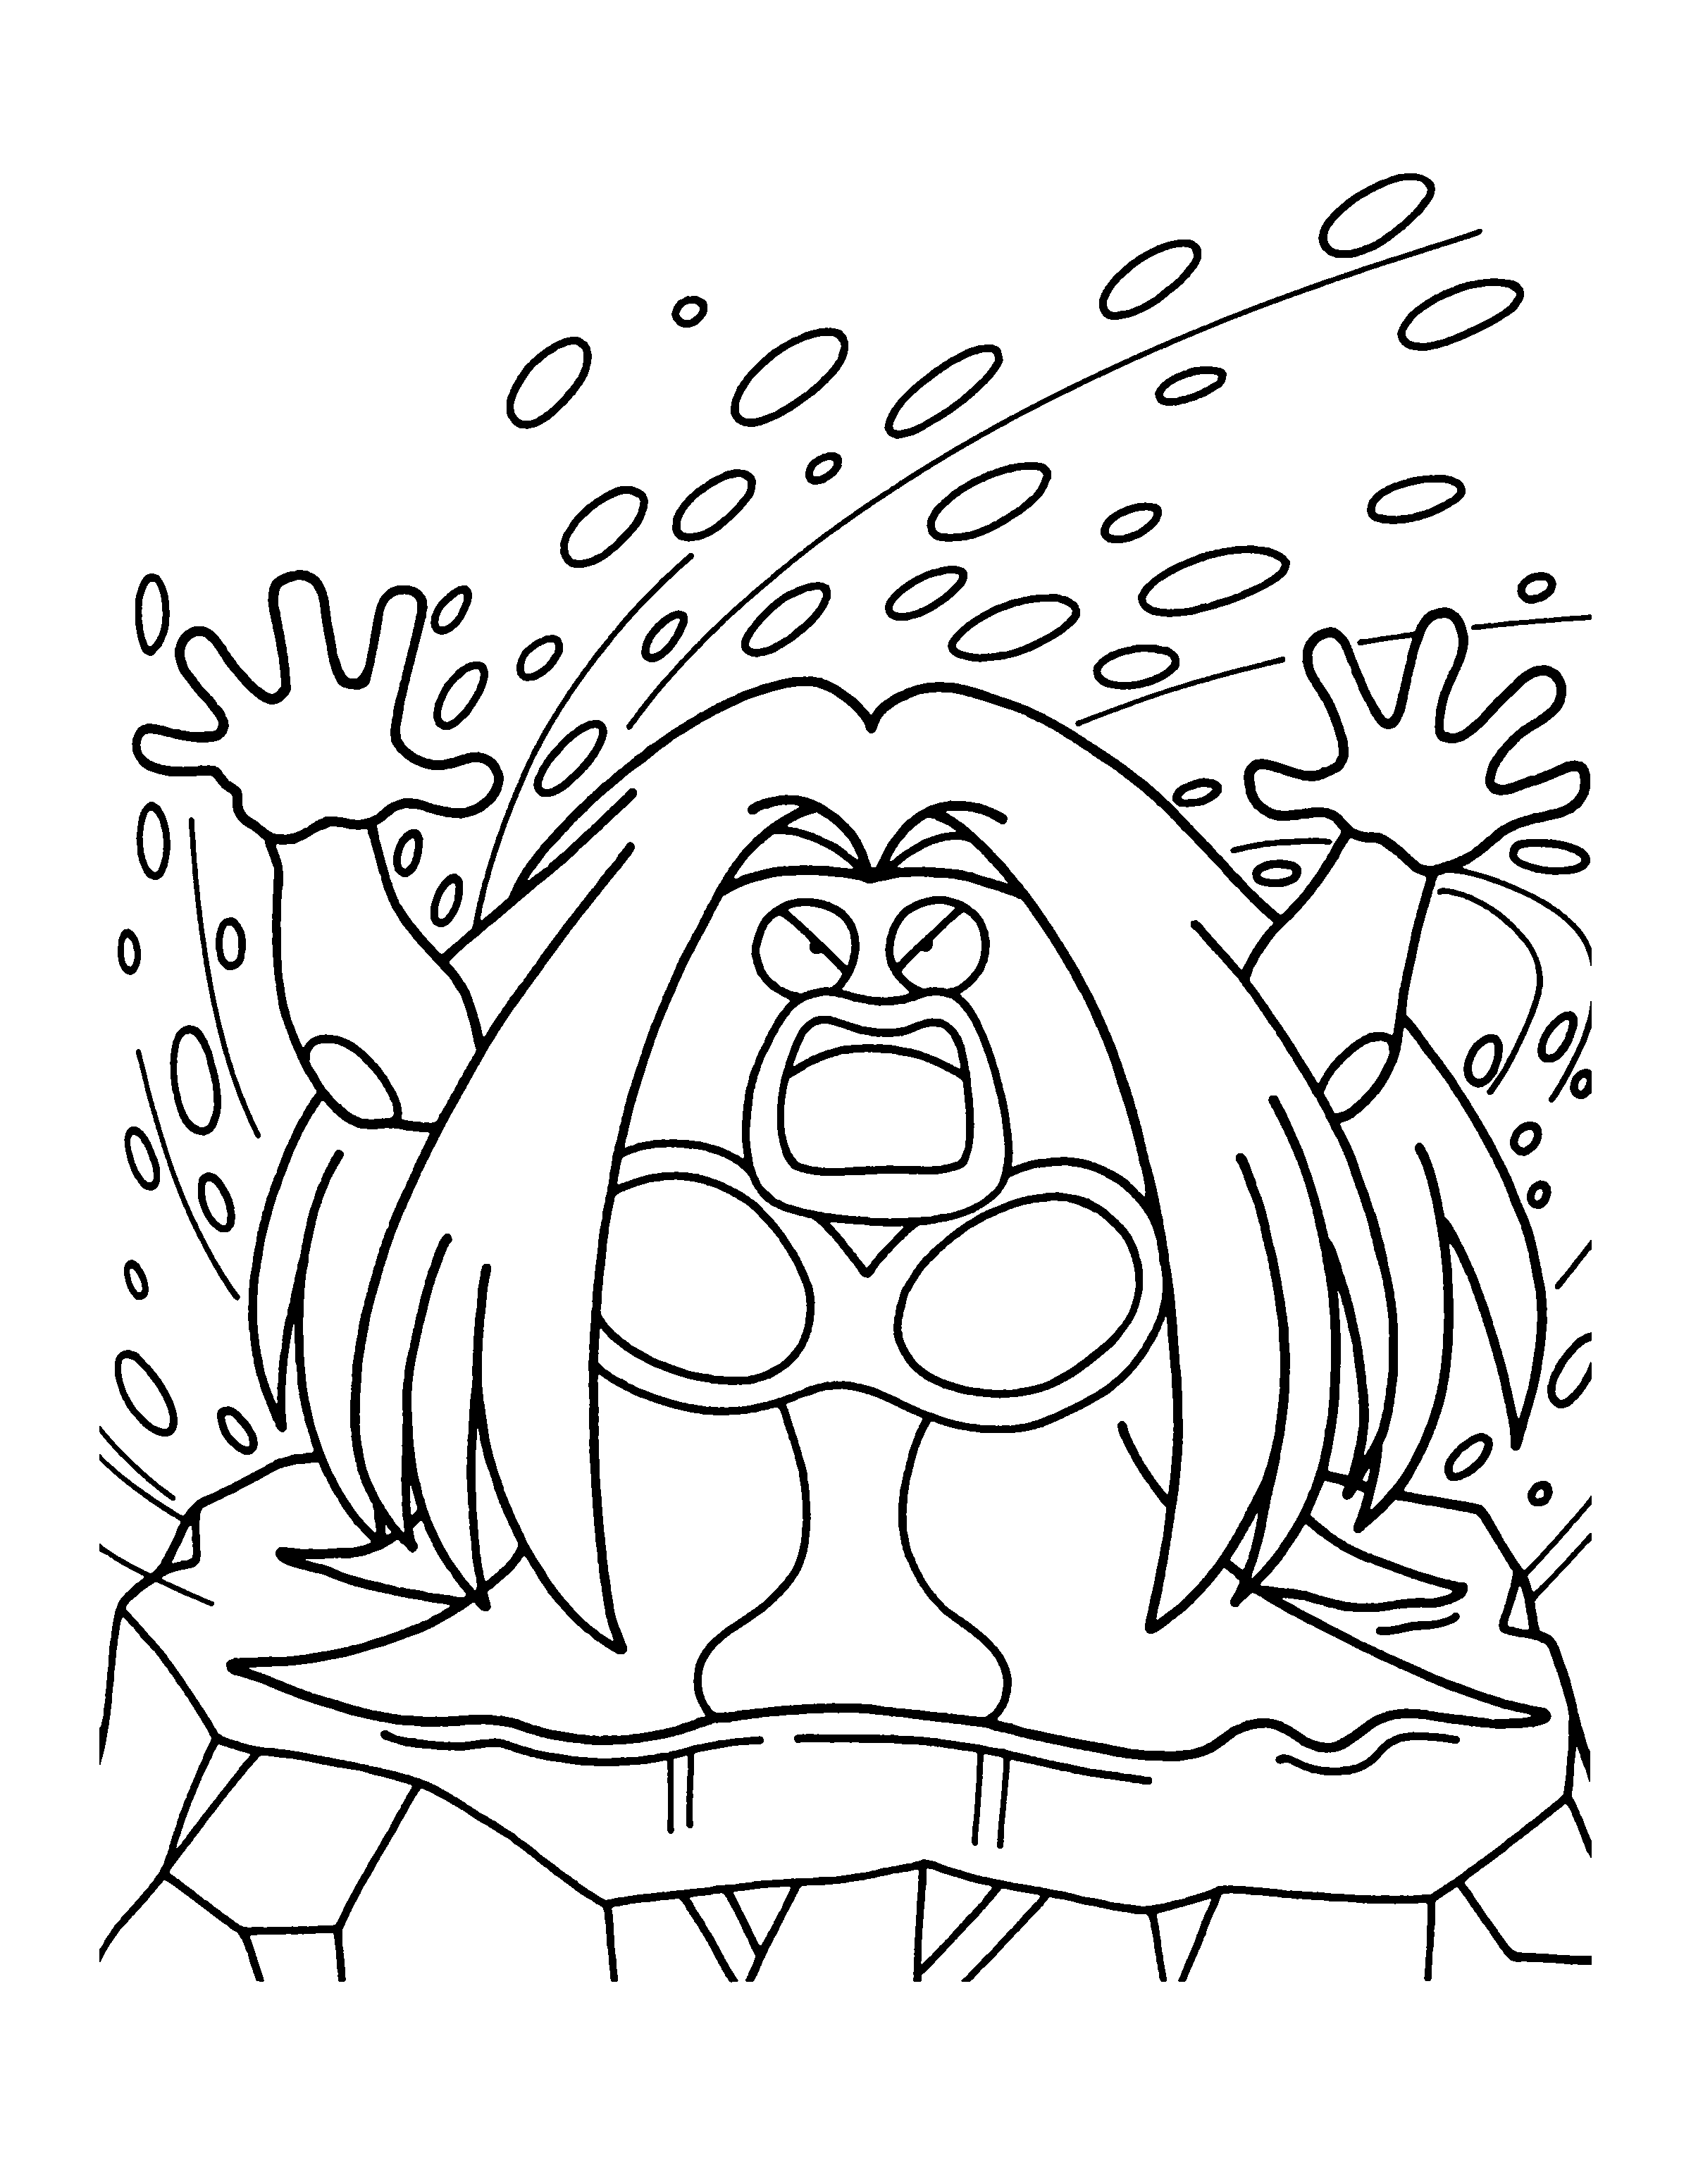 Pokemon Coloring Pages